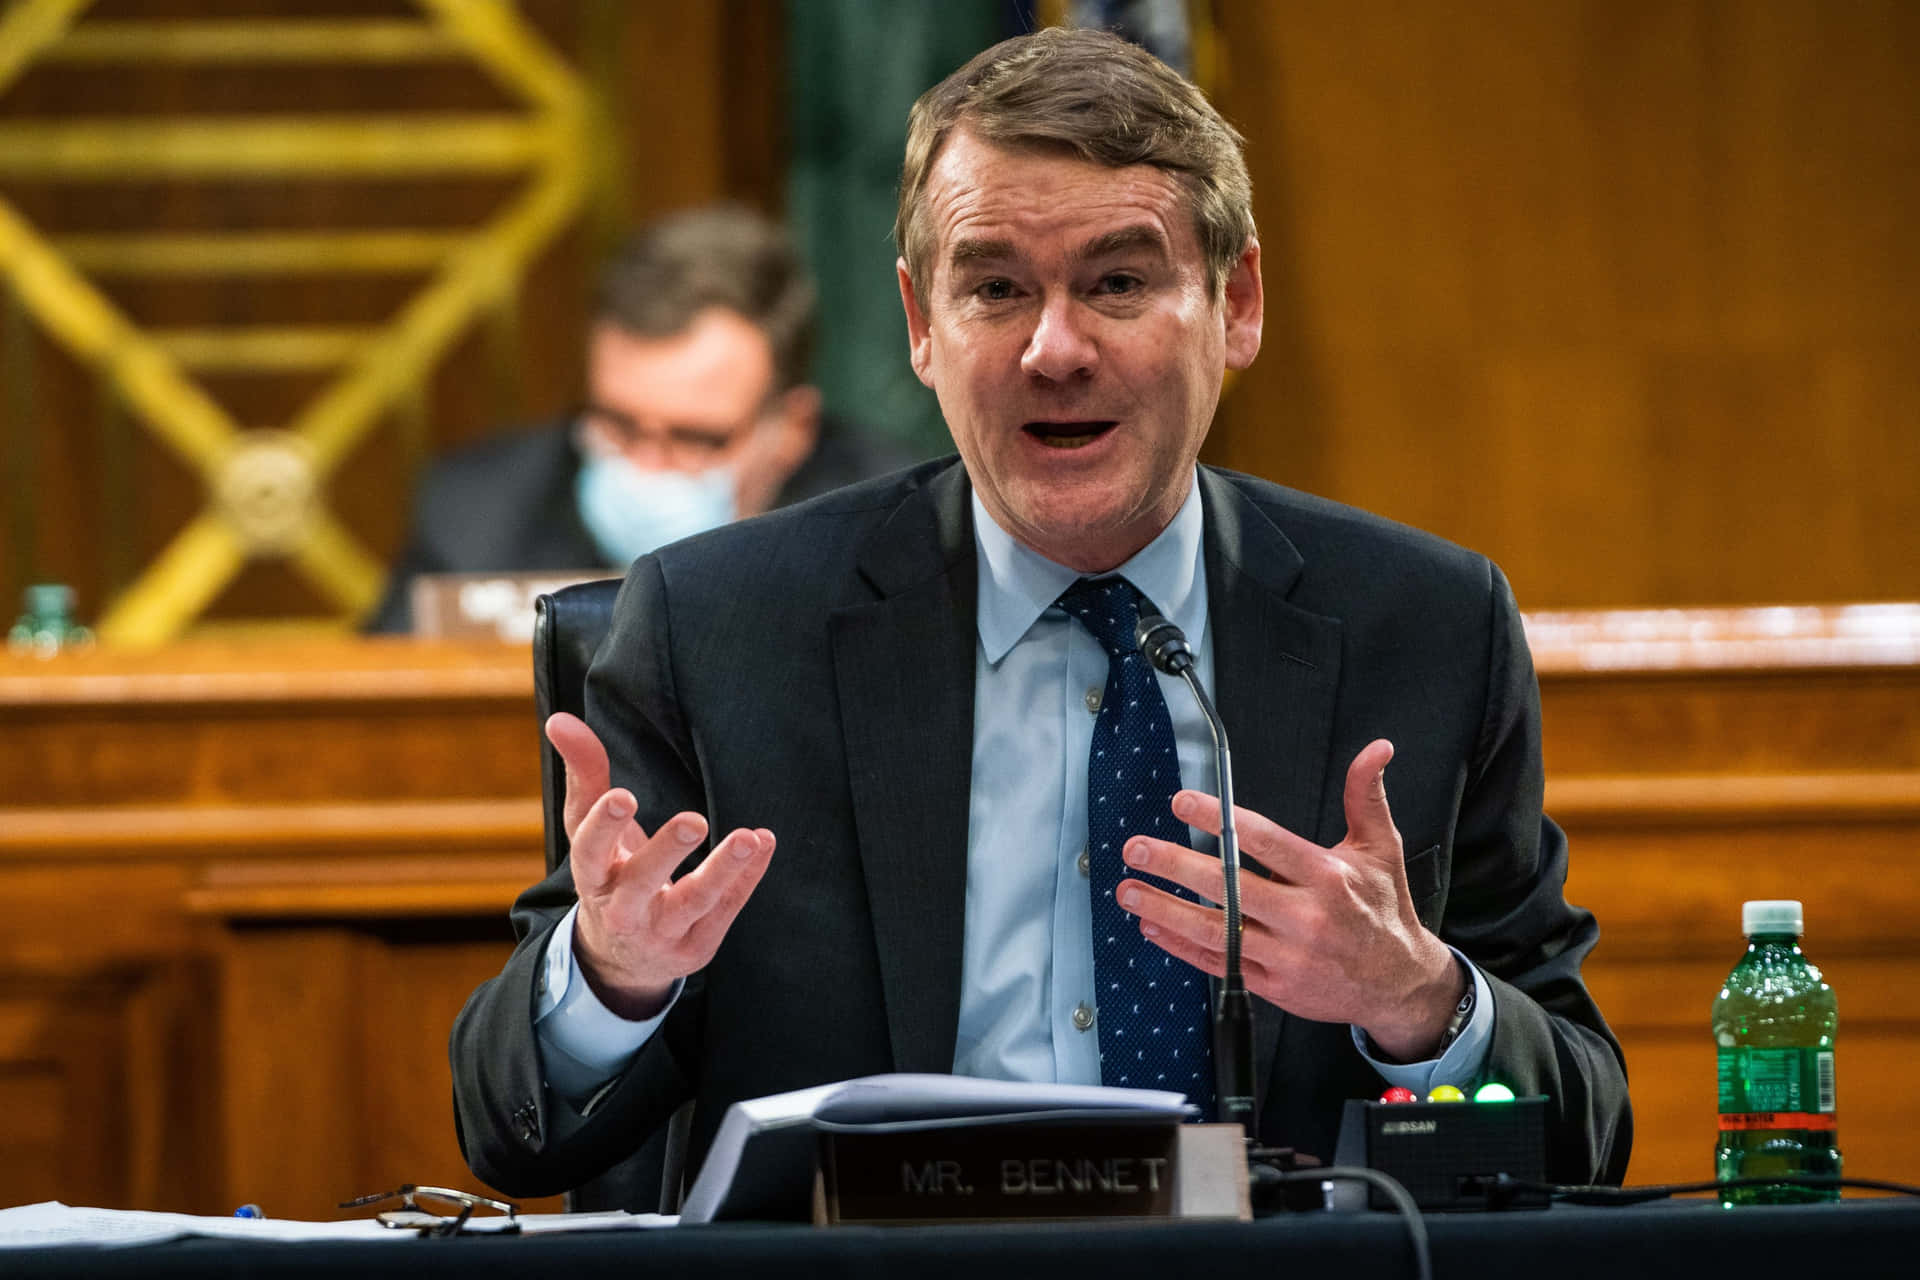 Michael Bennet Hand Gesture While Talking Wallpaper